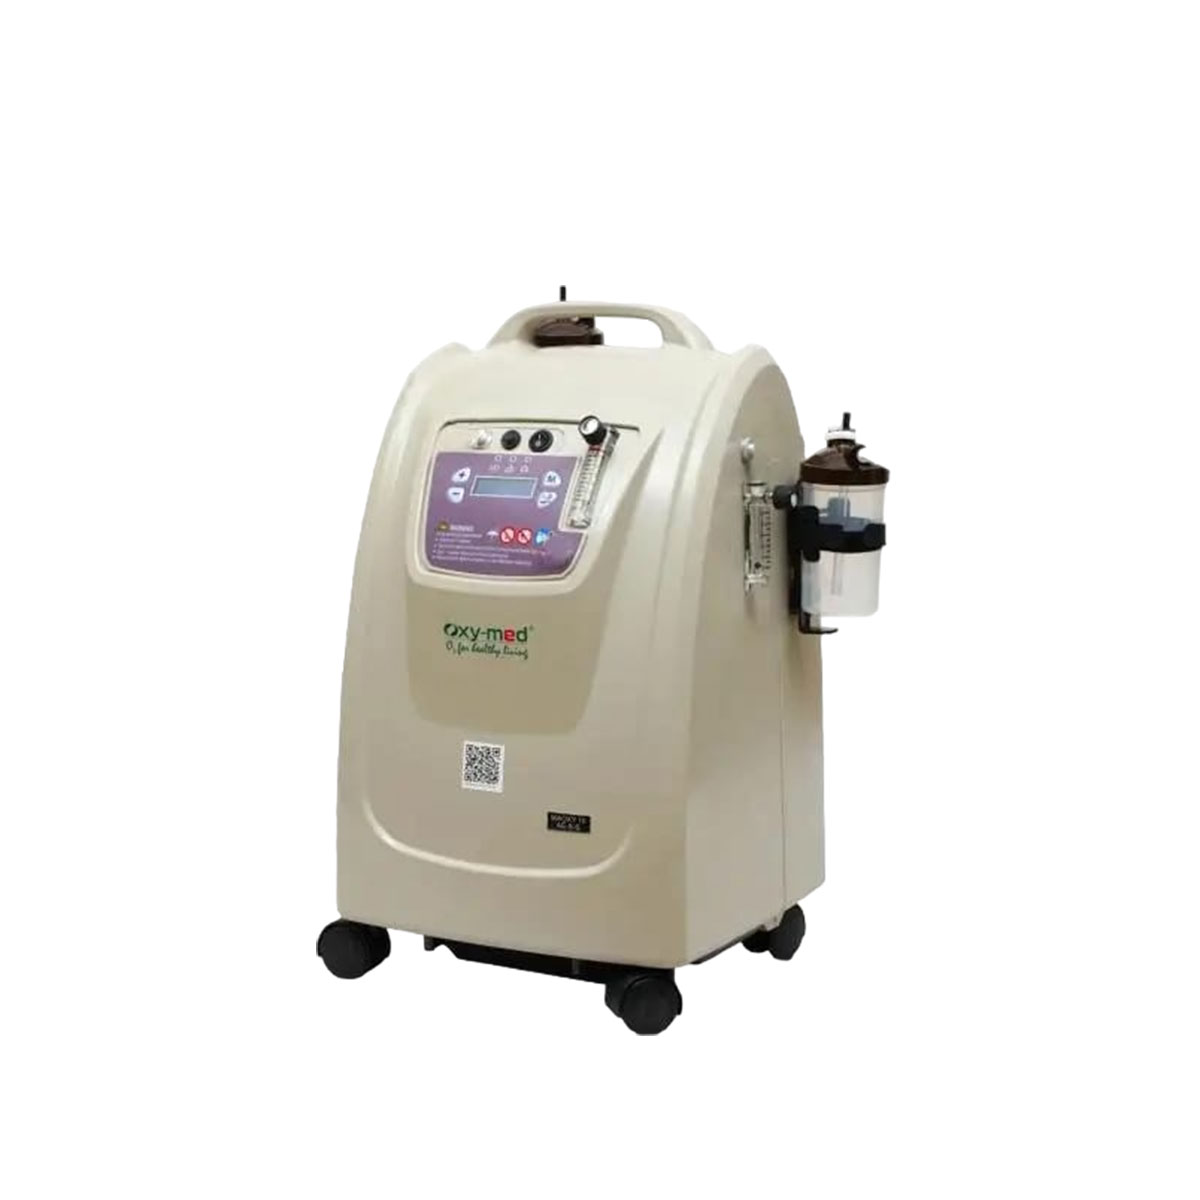 10 Lpm Oxymed Oxygen Concentrator On Sale Suppliers, Service Provider in Chhatarpur